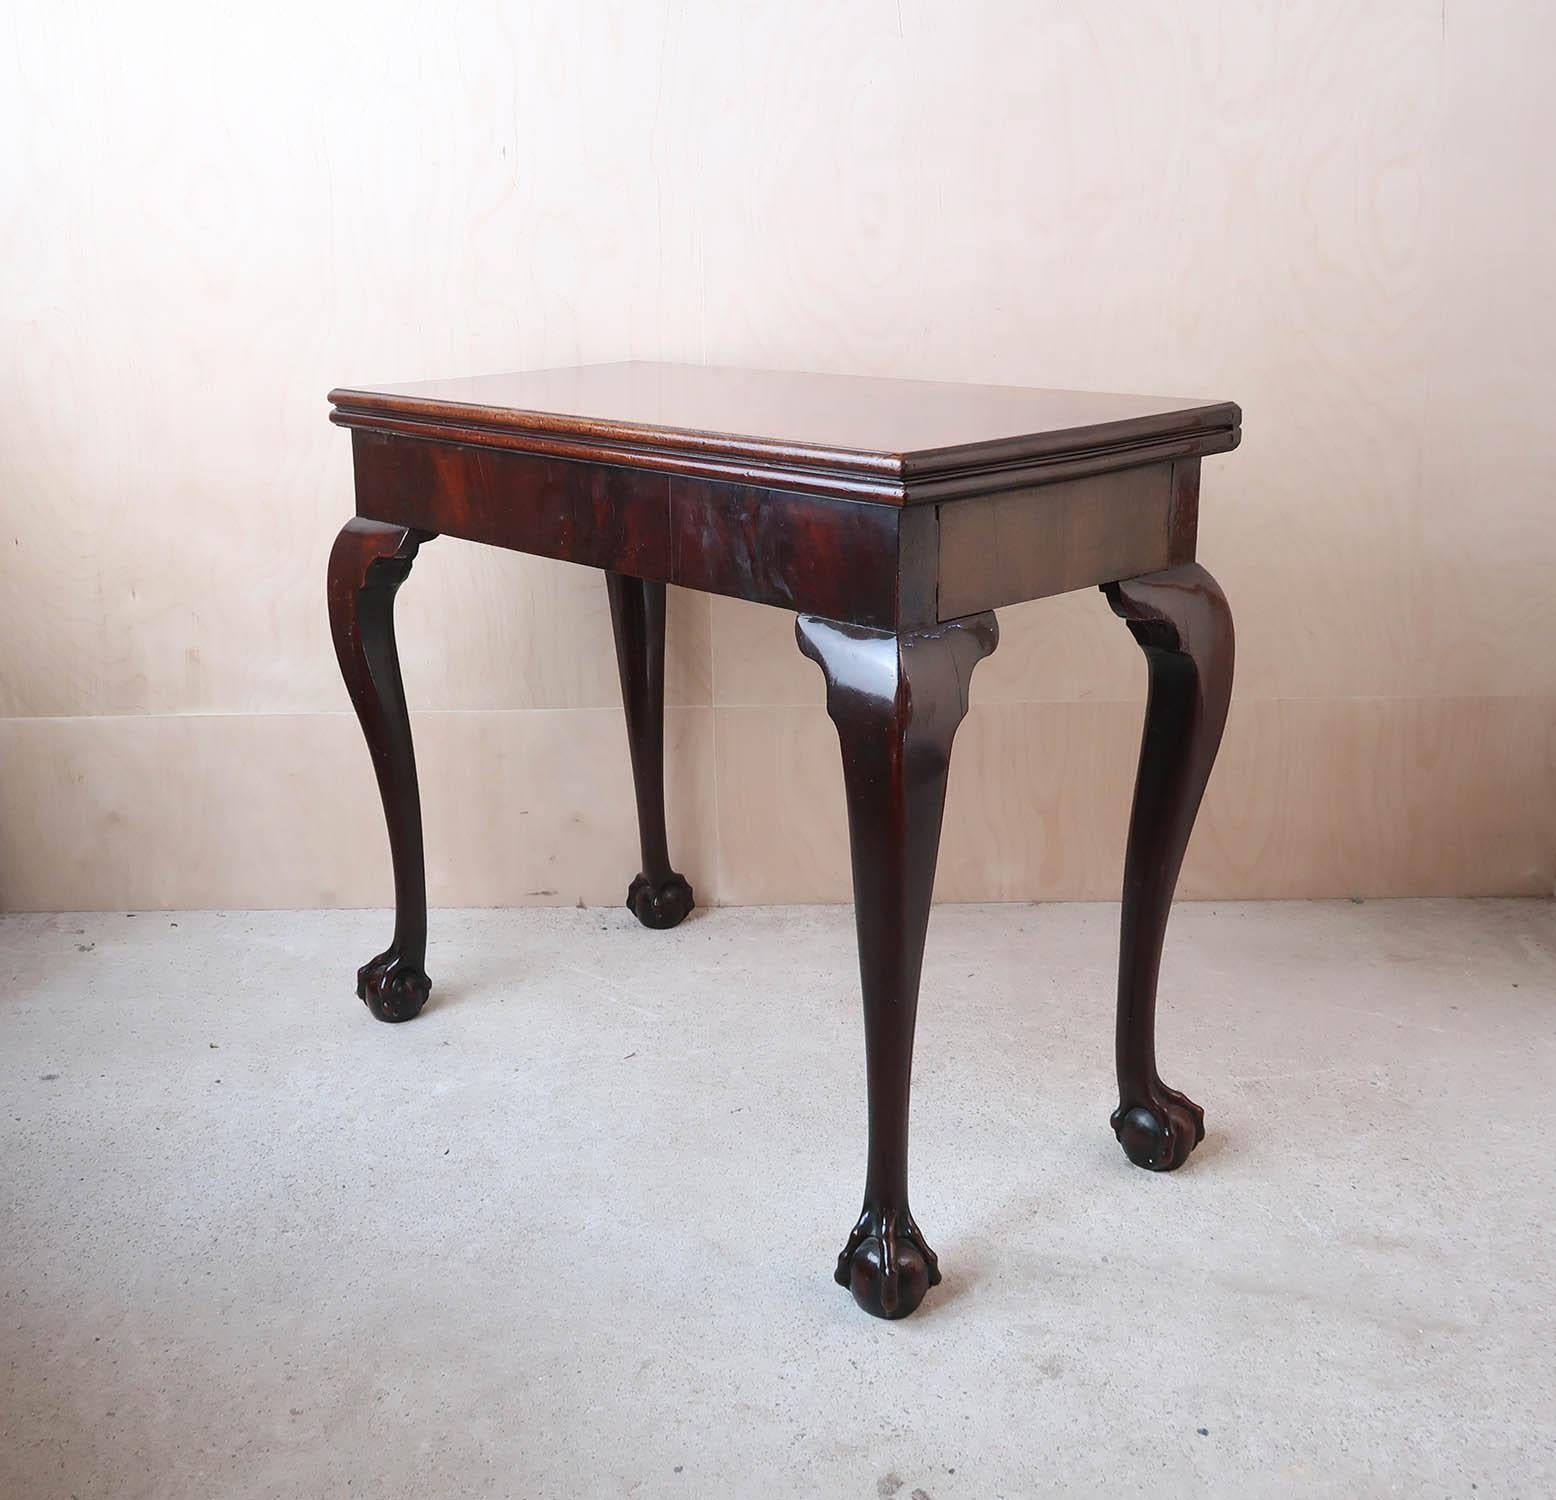 Wonderful Georgian side table

Beautiful timber with lovely figure and grain. All solid tropical hardwood apart from thick veneer on the apron.

Lovely quality carving to the claw and ball feet.

The top folds over so it can be used as a centre